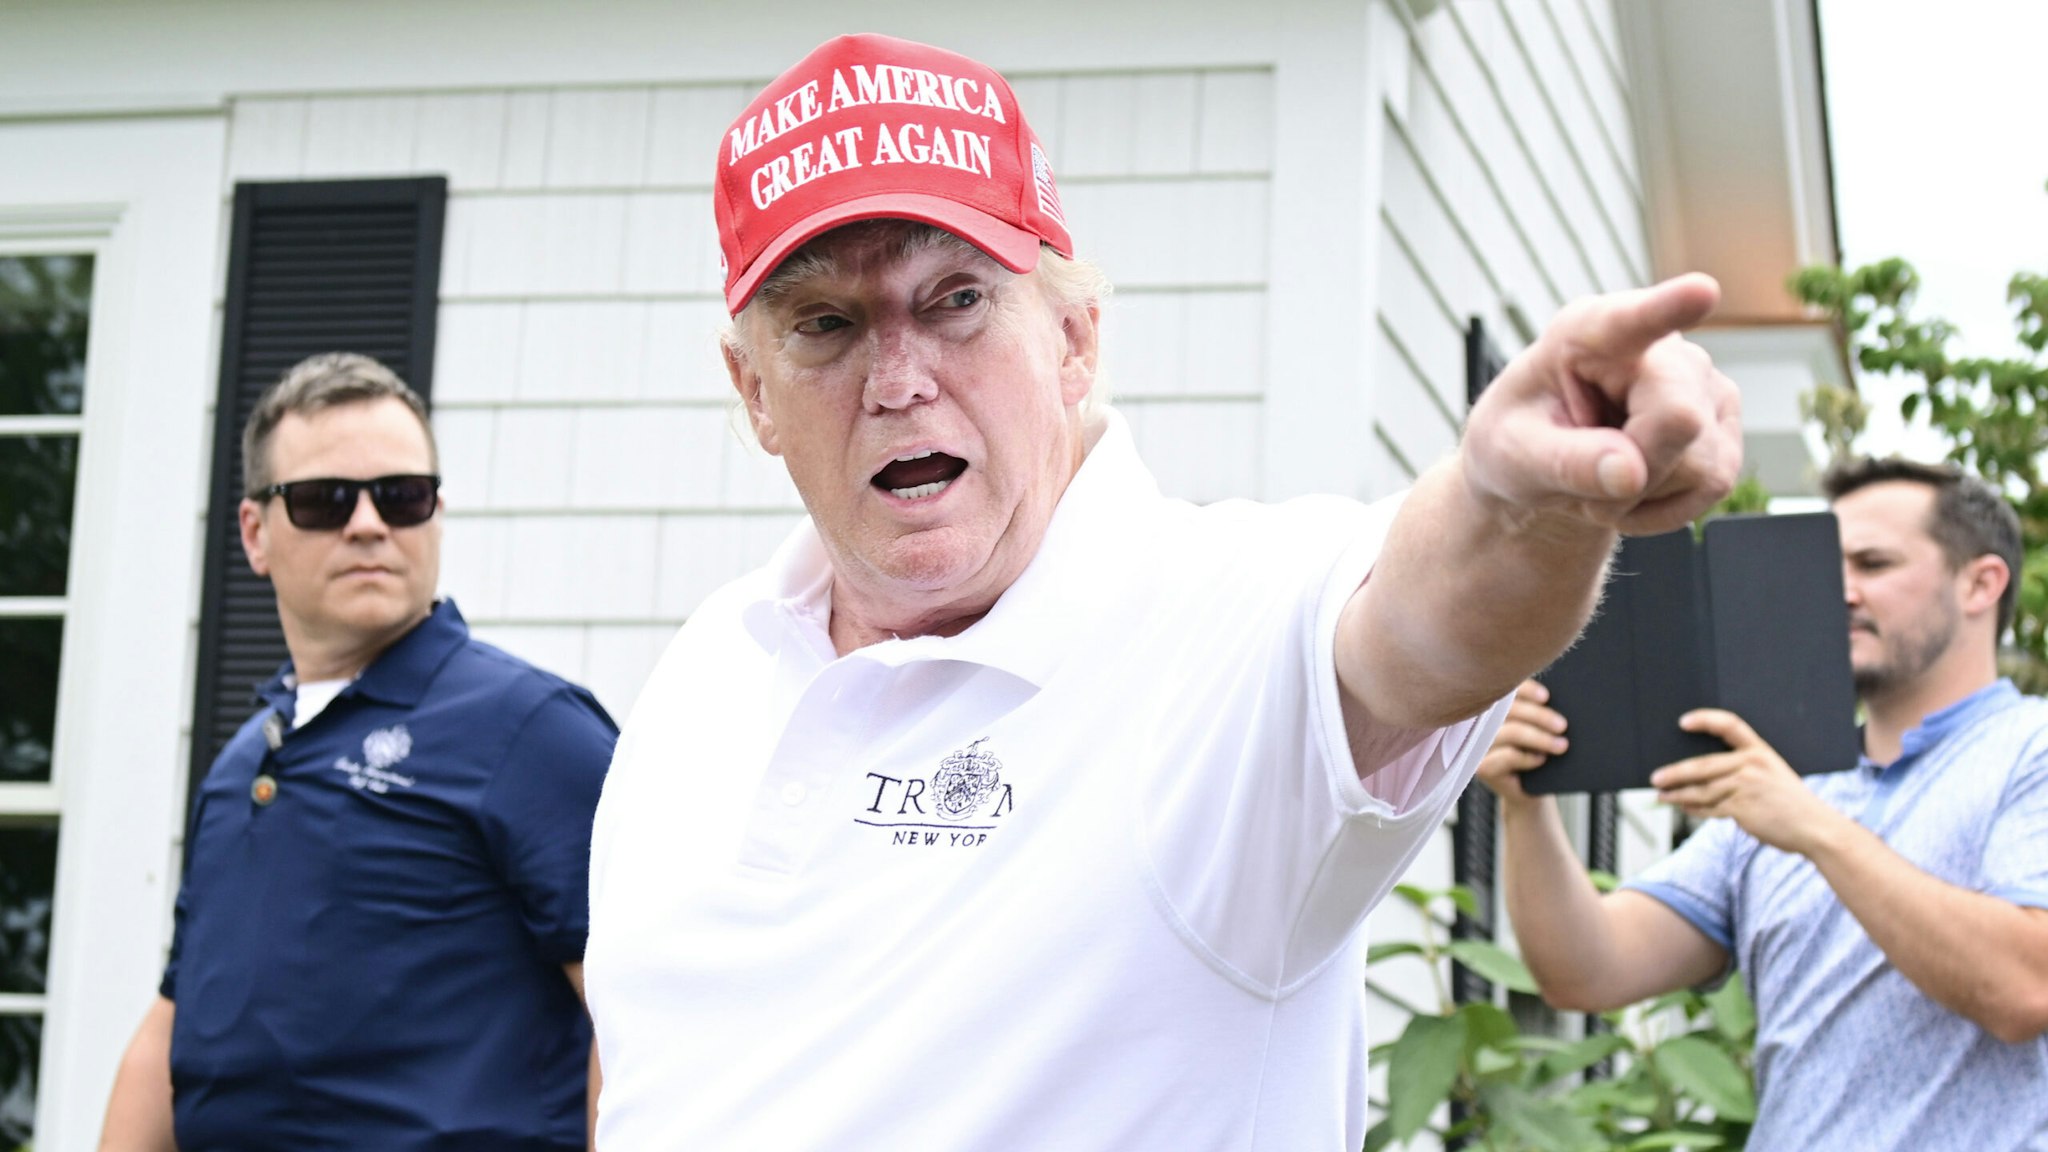 BEDMINSTER, NEW JERSEY - JULY 29: Former U.S. President Donald Trump gestures to an attendee during day one of the LIV Golf Invitational - Bedminster at Trump National Golf Club Bedminster on July 29, 2022 in Bedminster, New Jersey.